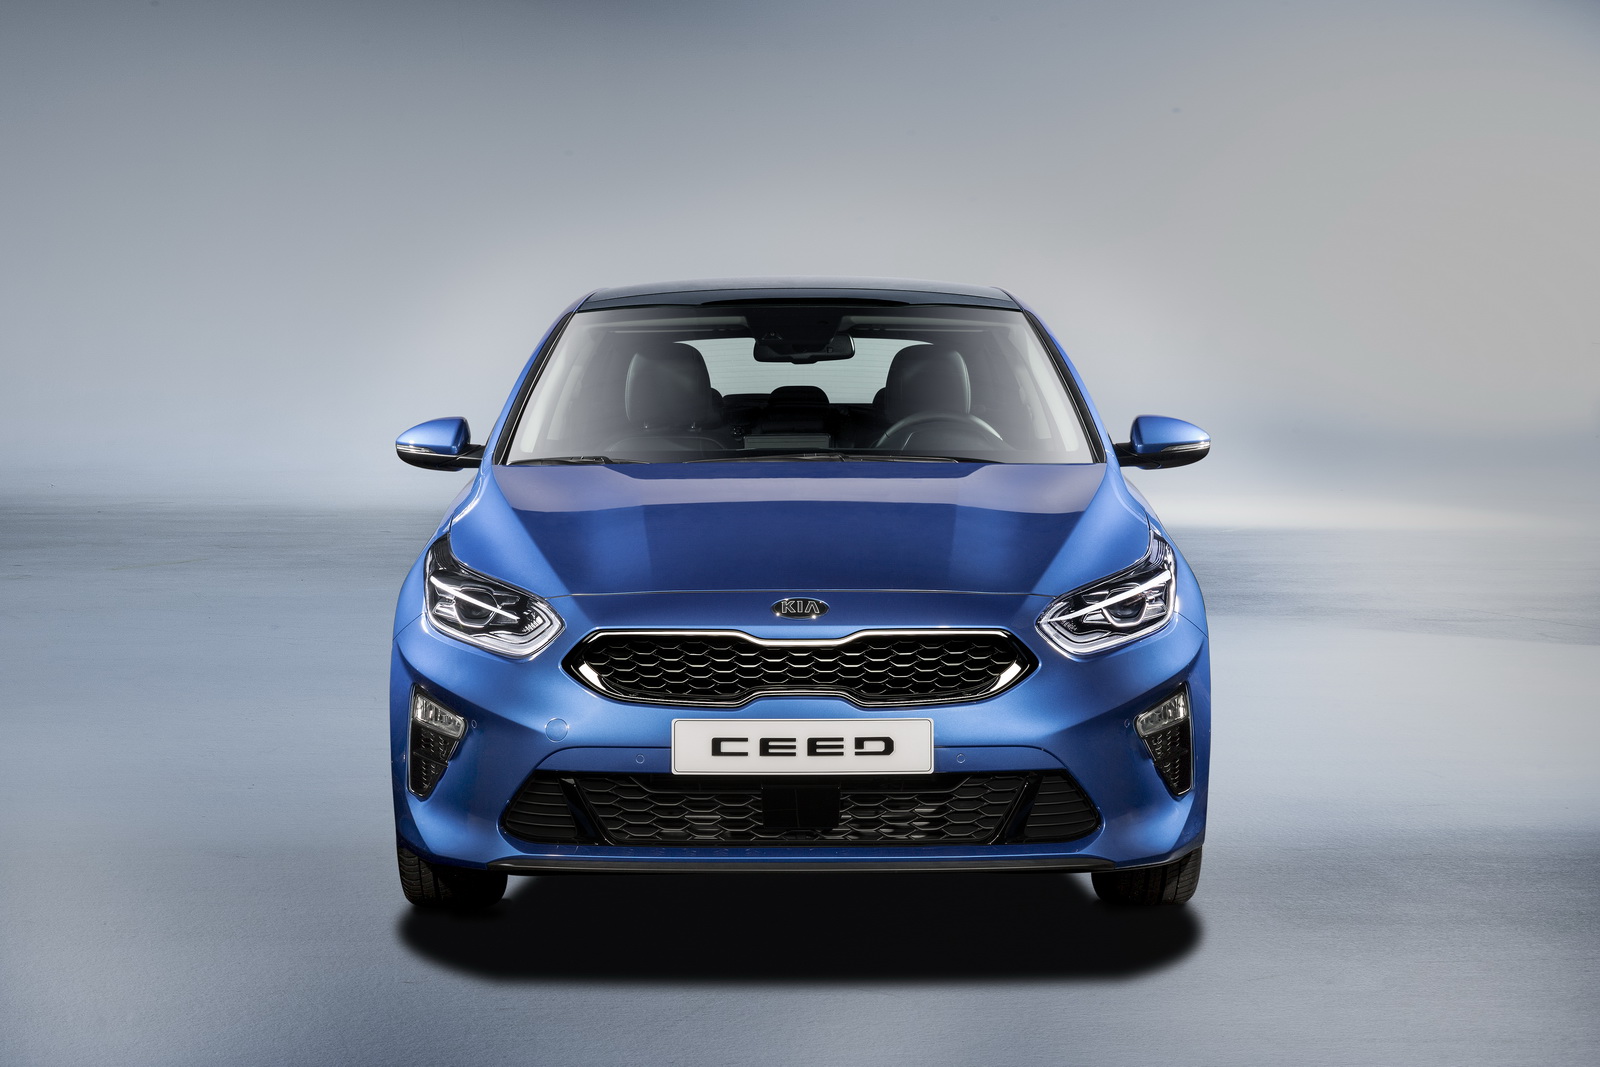 Nurburgring-Developed Kia Ceed GT To Arrive Next Year, Could Be A Mild ...